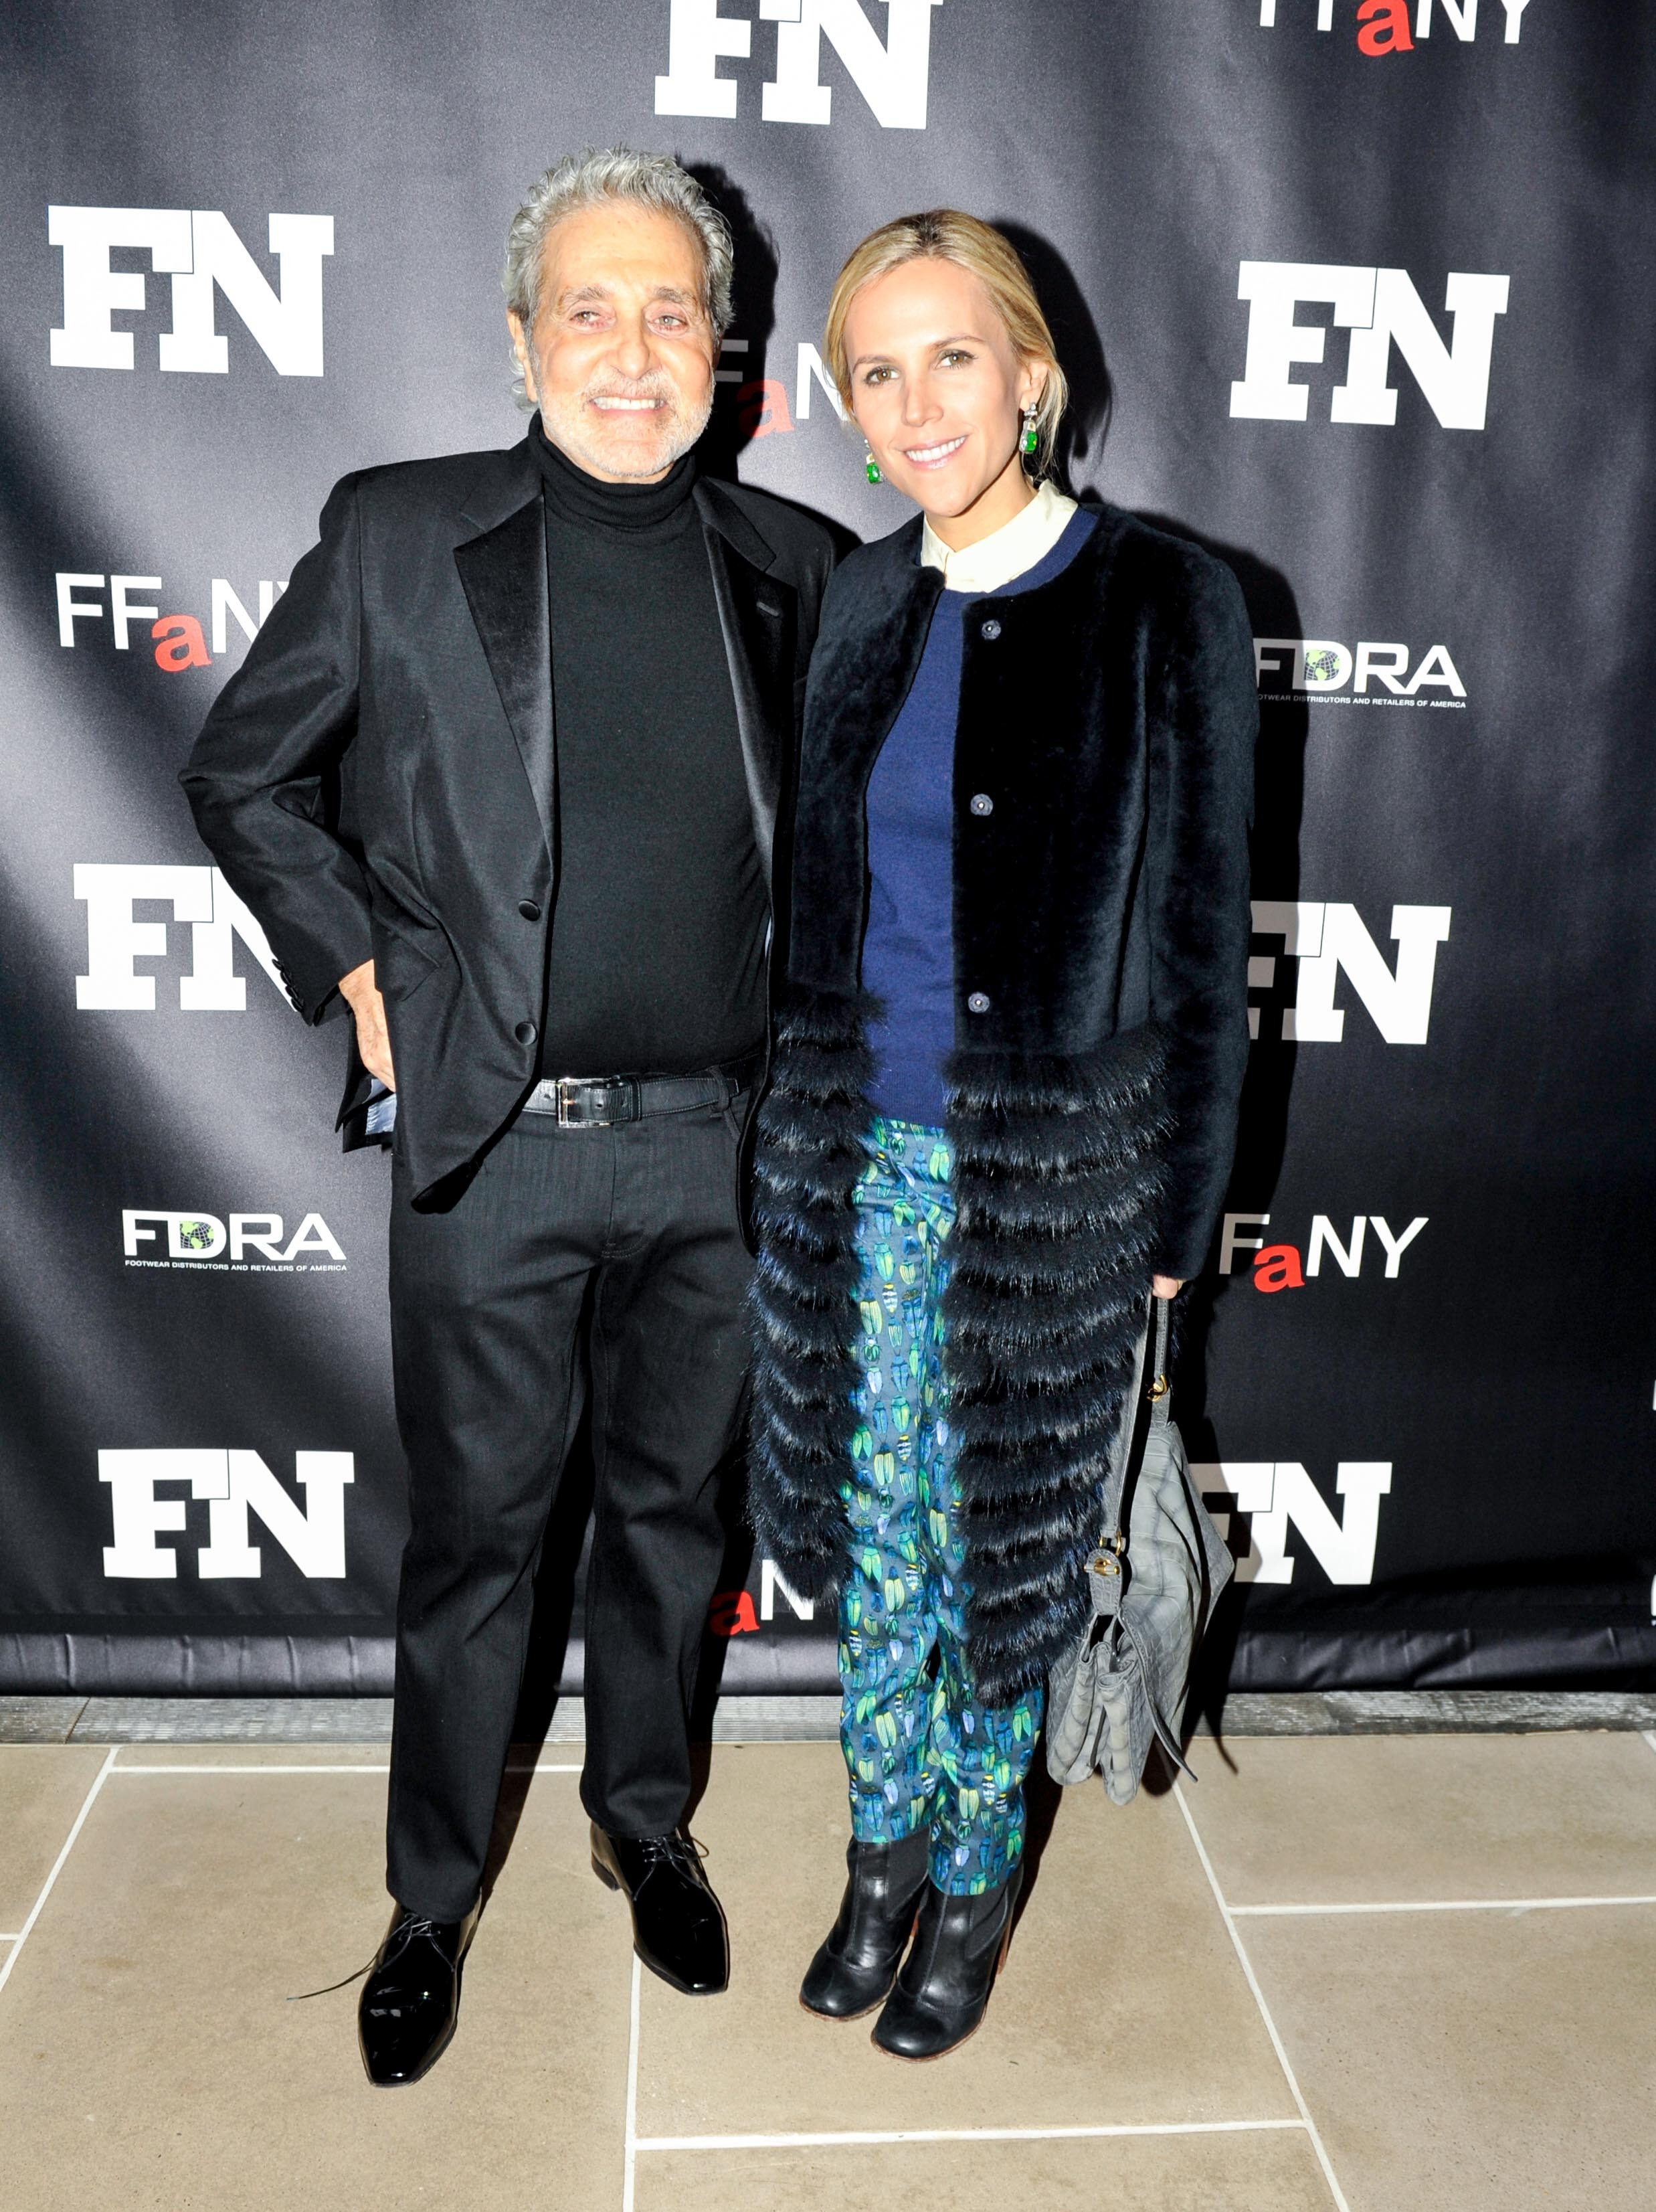 Vince Camuto dies at age 78